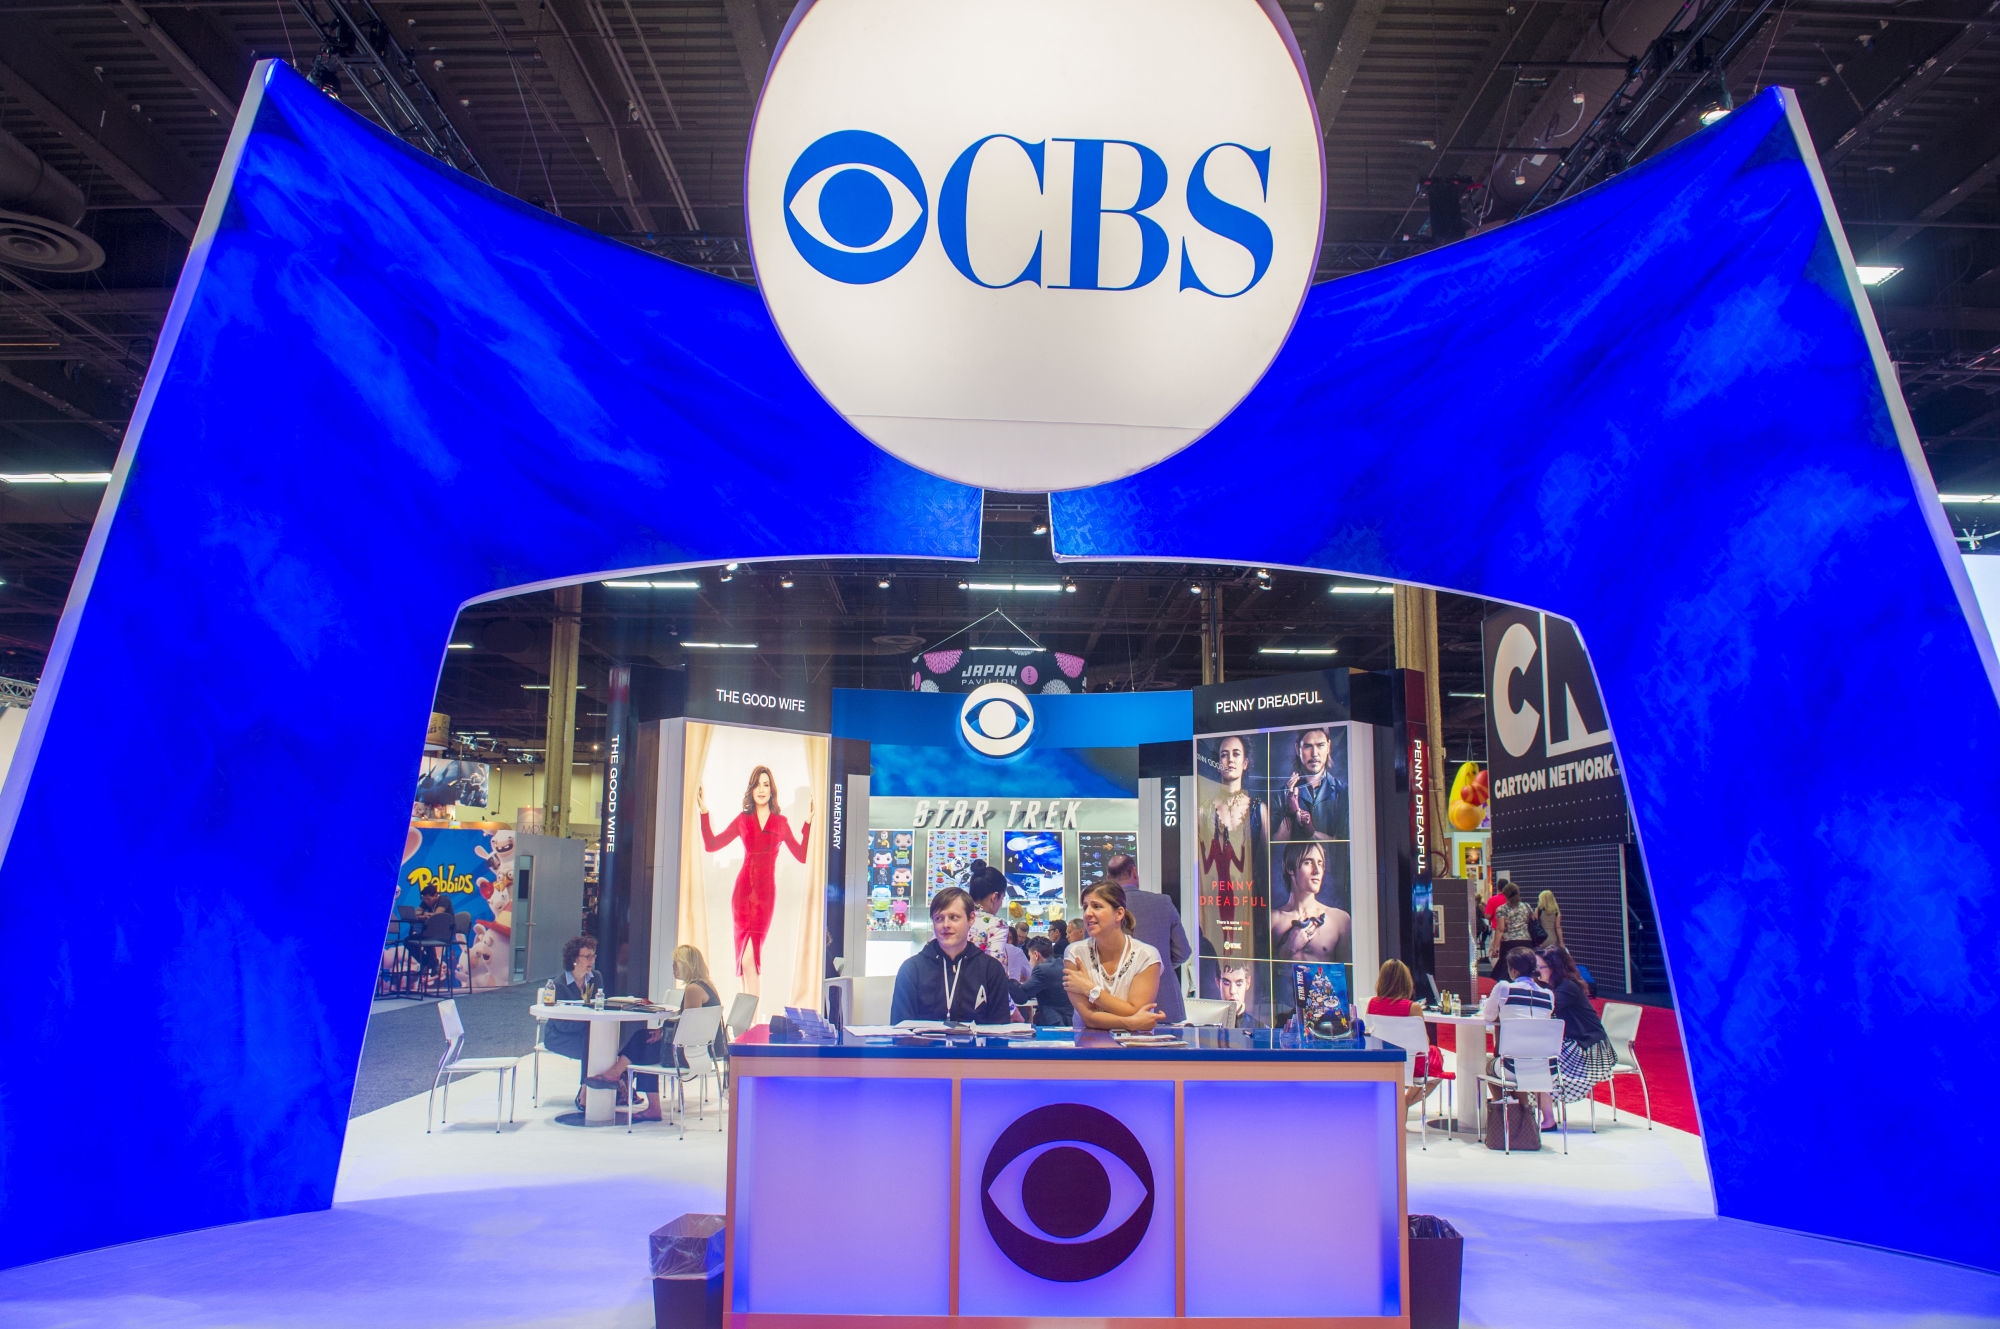 CBS TV channels are back on Dish | DeviceDaily.com